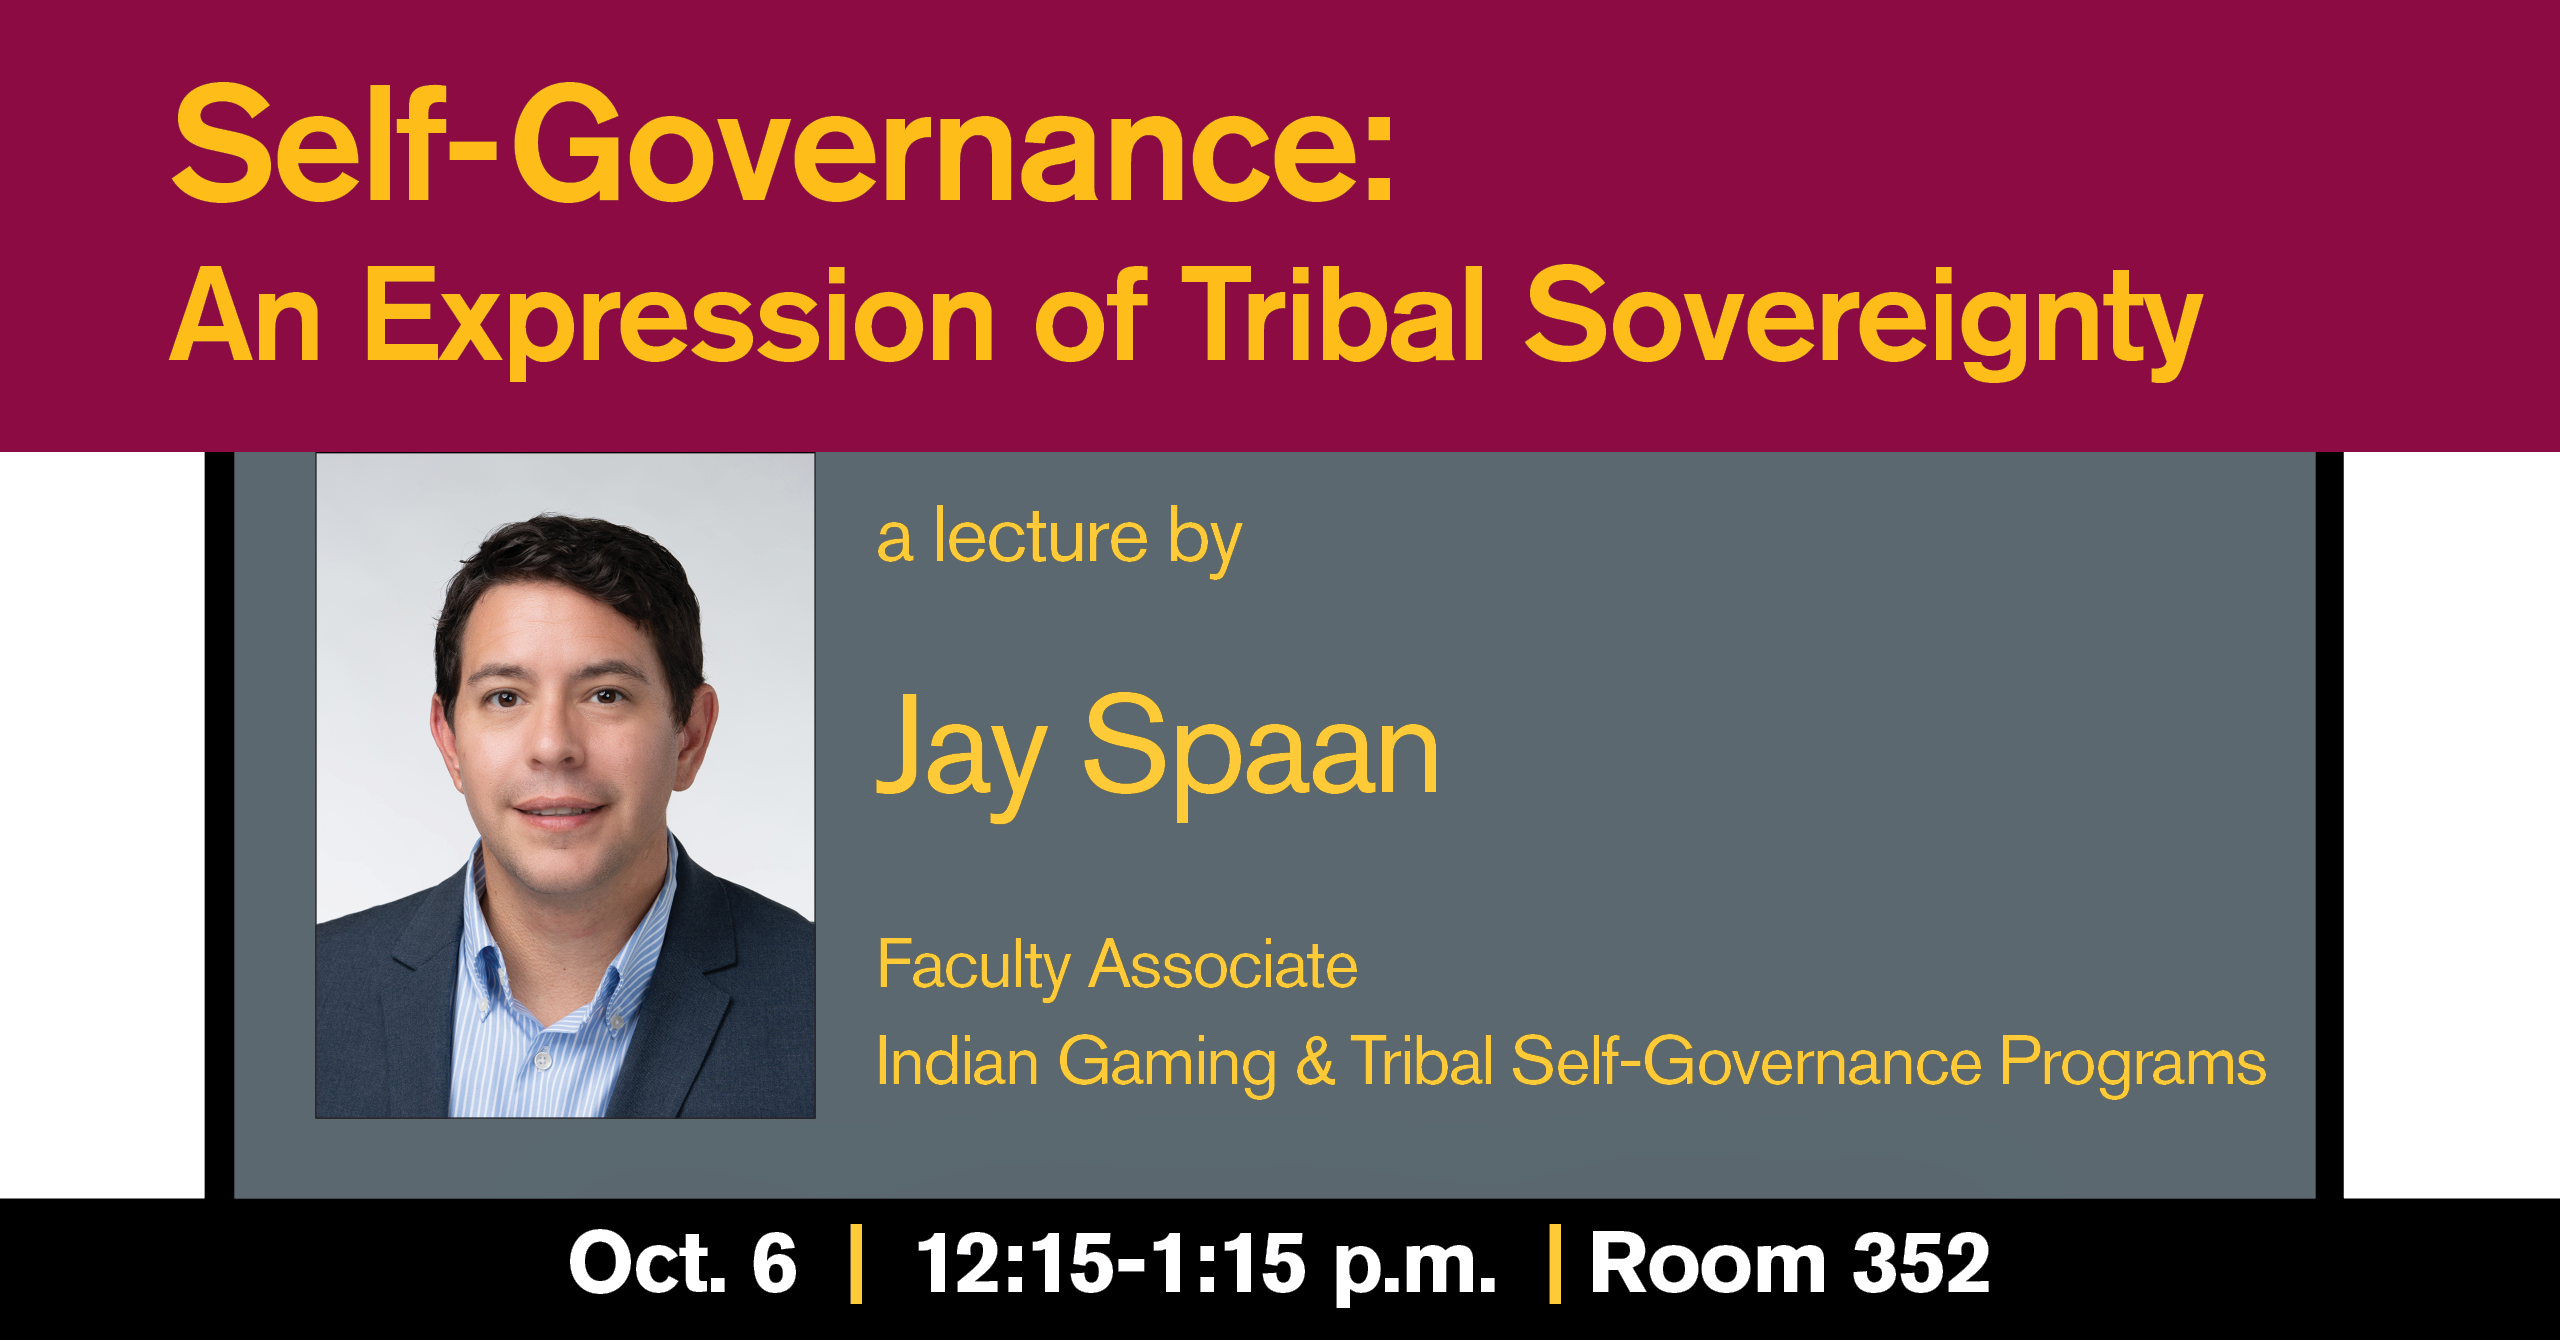 Self-Governance: An Expression of Tribal Sovereignty